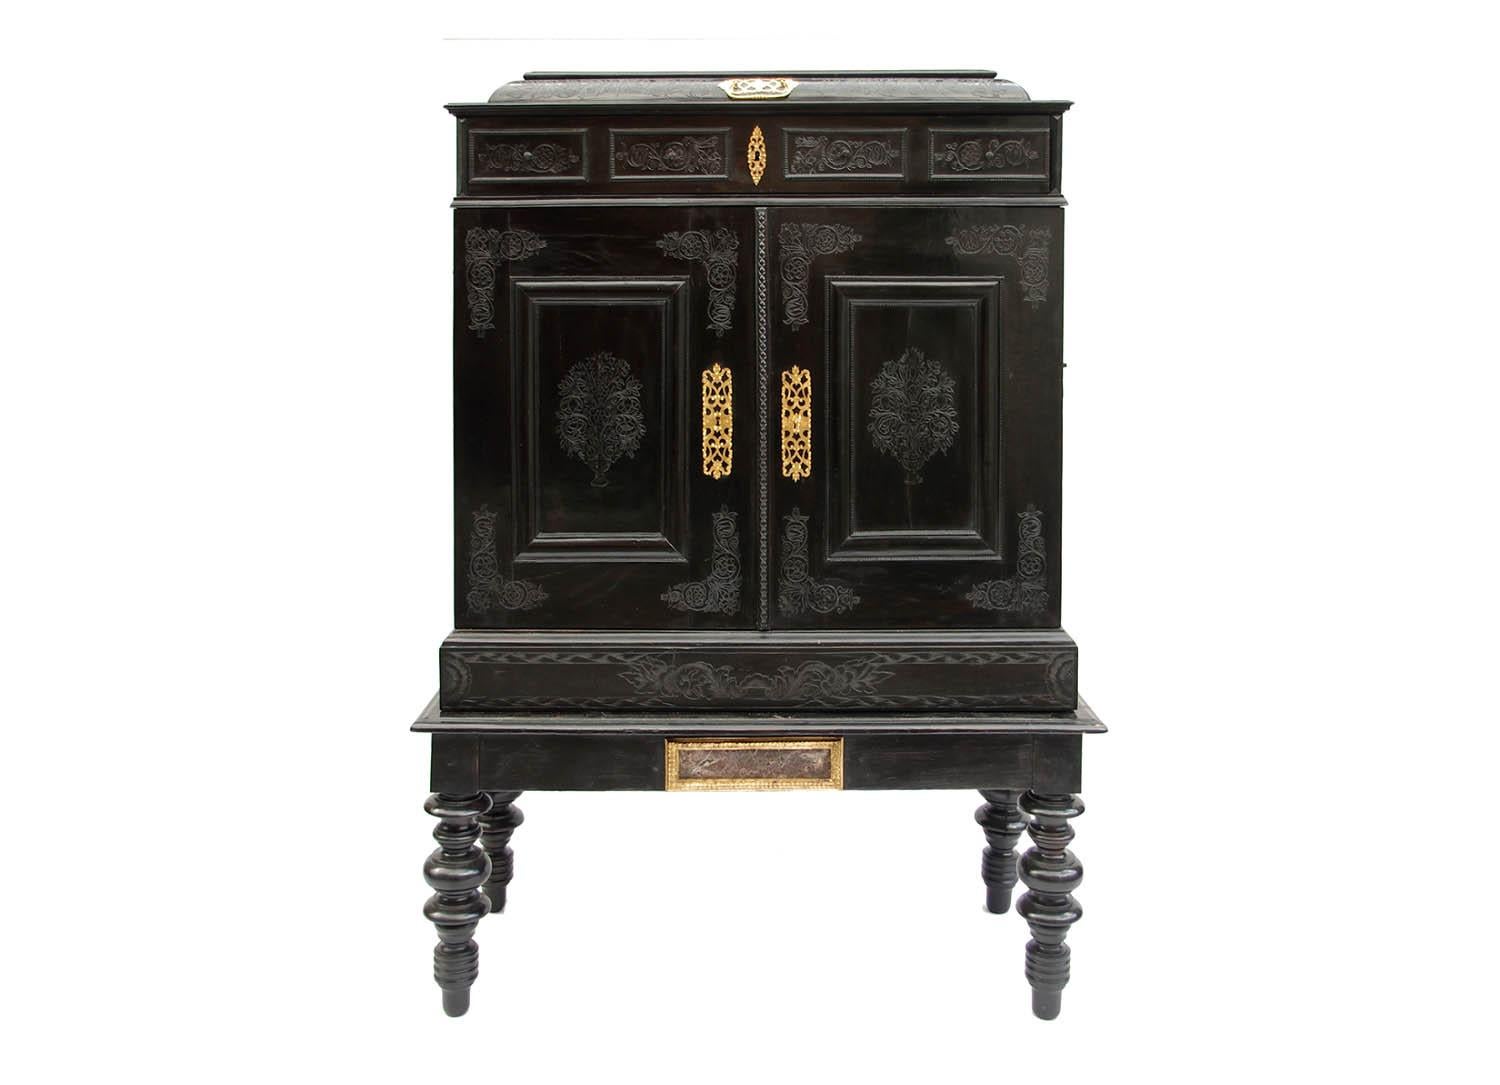 Compelling cabinet in scagliola with an architectural structure in veneered ebony, standing on legs composed of four legs in turned wood with a decor of spheres and an apron adorned with a scagliola plate in marble imitation framed by a giltwood